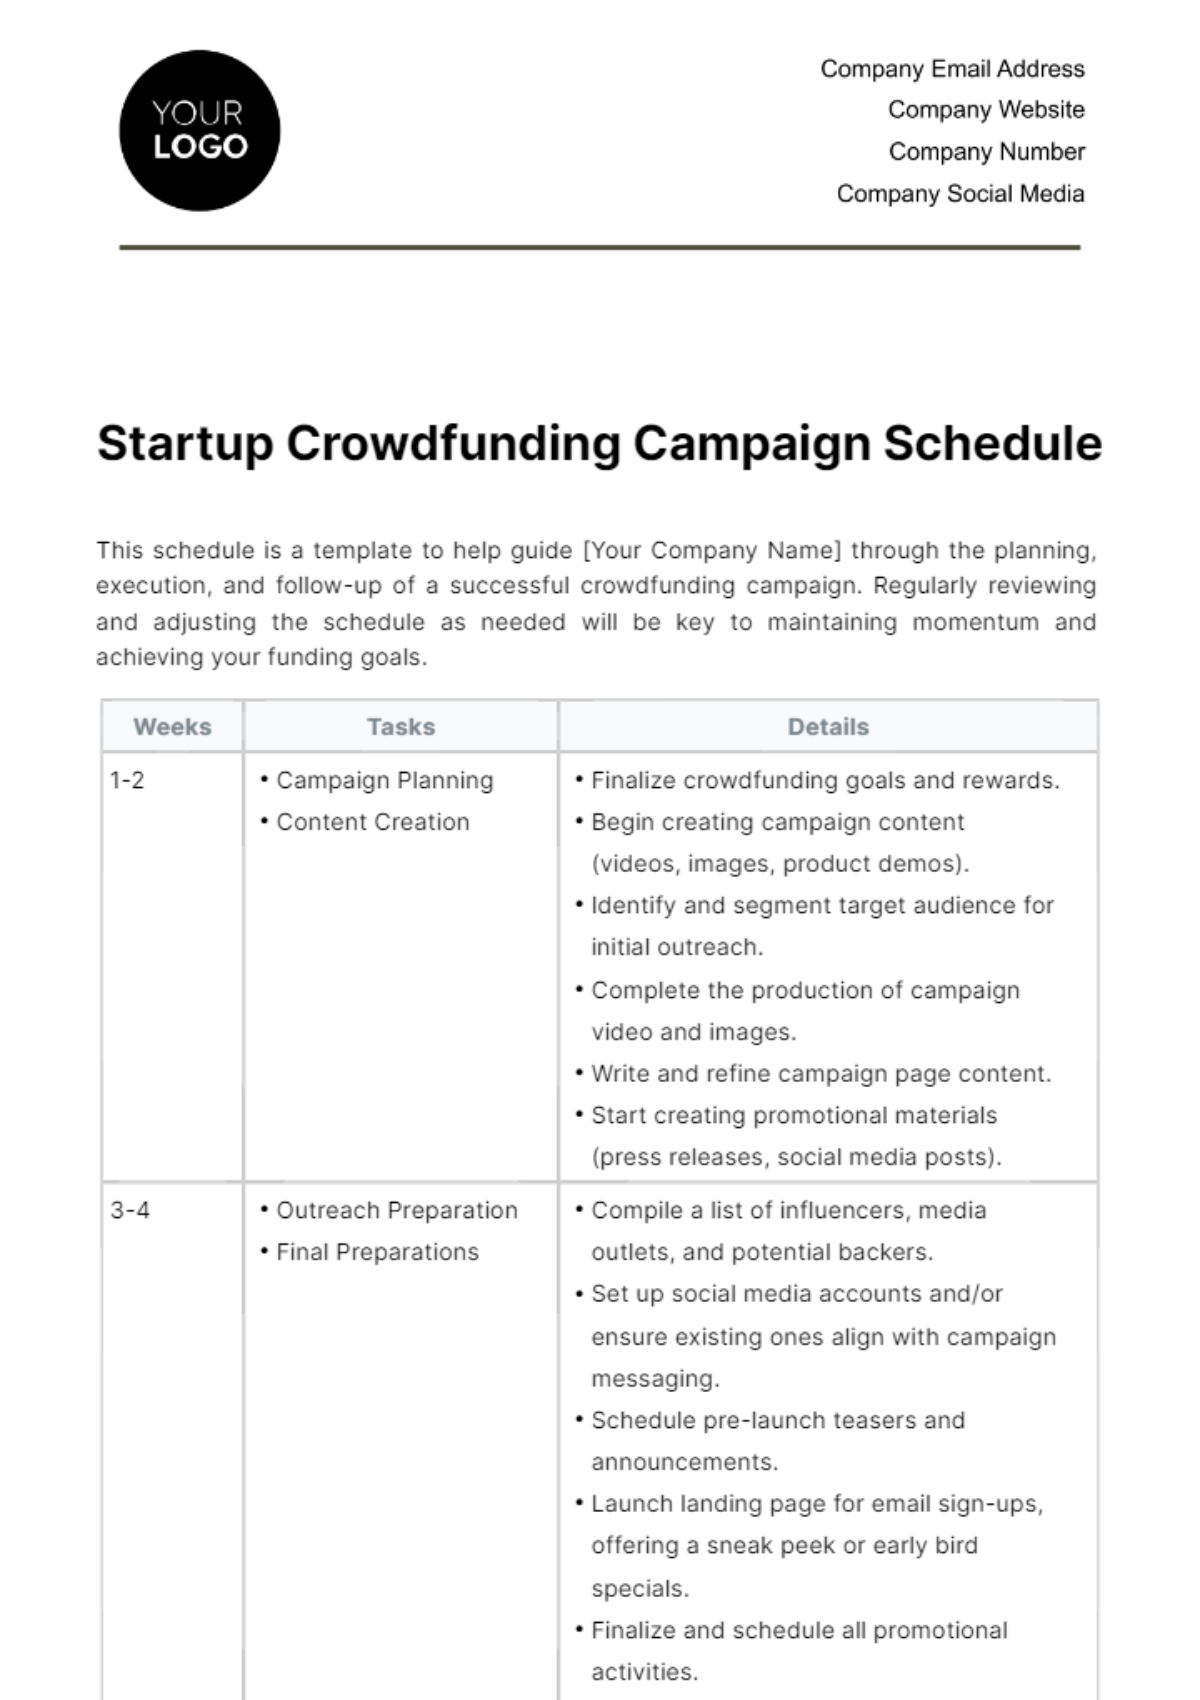 Startup Crowdfunding Campaign Schedule Template